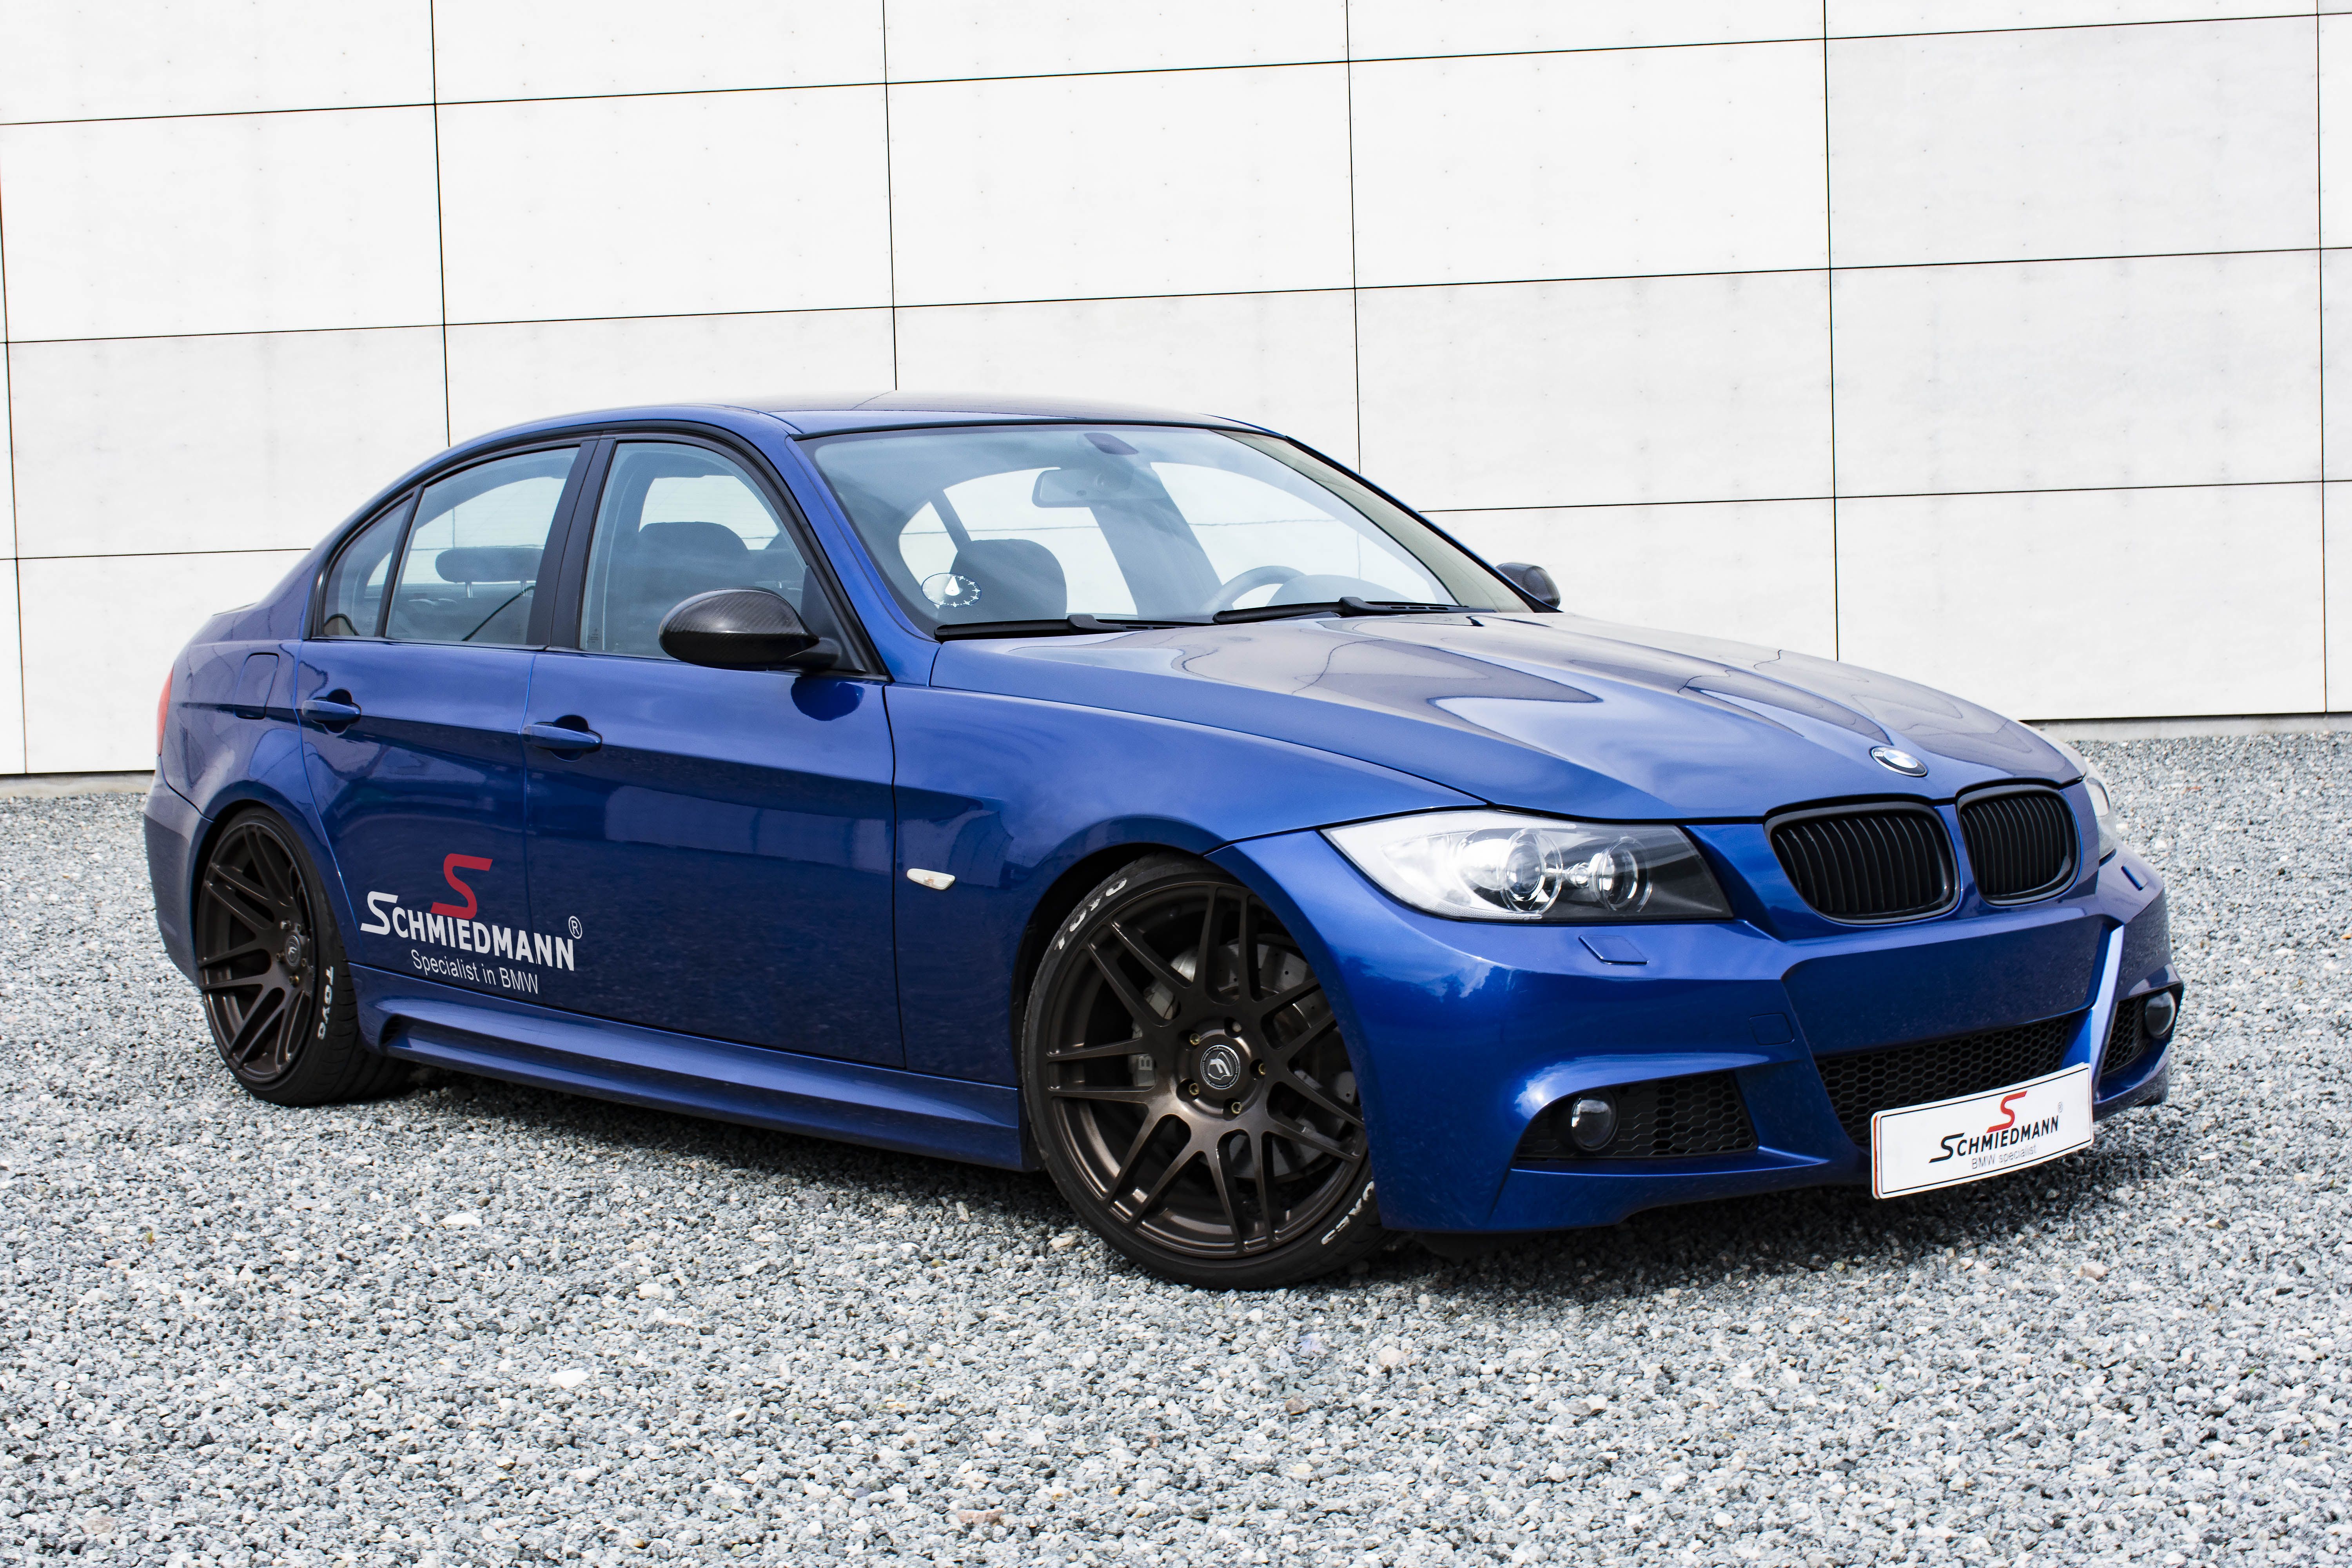 This Beautiful Blue BMW 3 Series E90 320I Belonged To One Of Our Experts, Henrik, For 4 Years, Until Recently He Sold It And Went For A. Custom Bmw, Bmw, Used Bmw